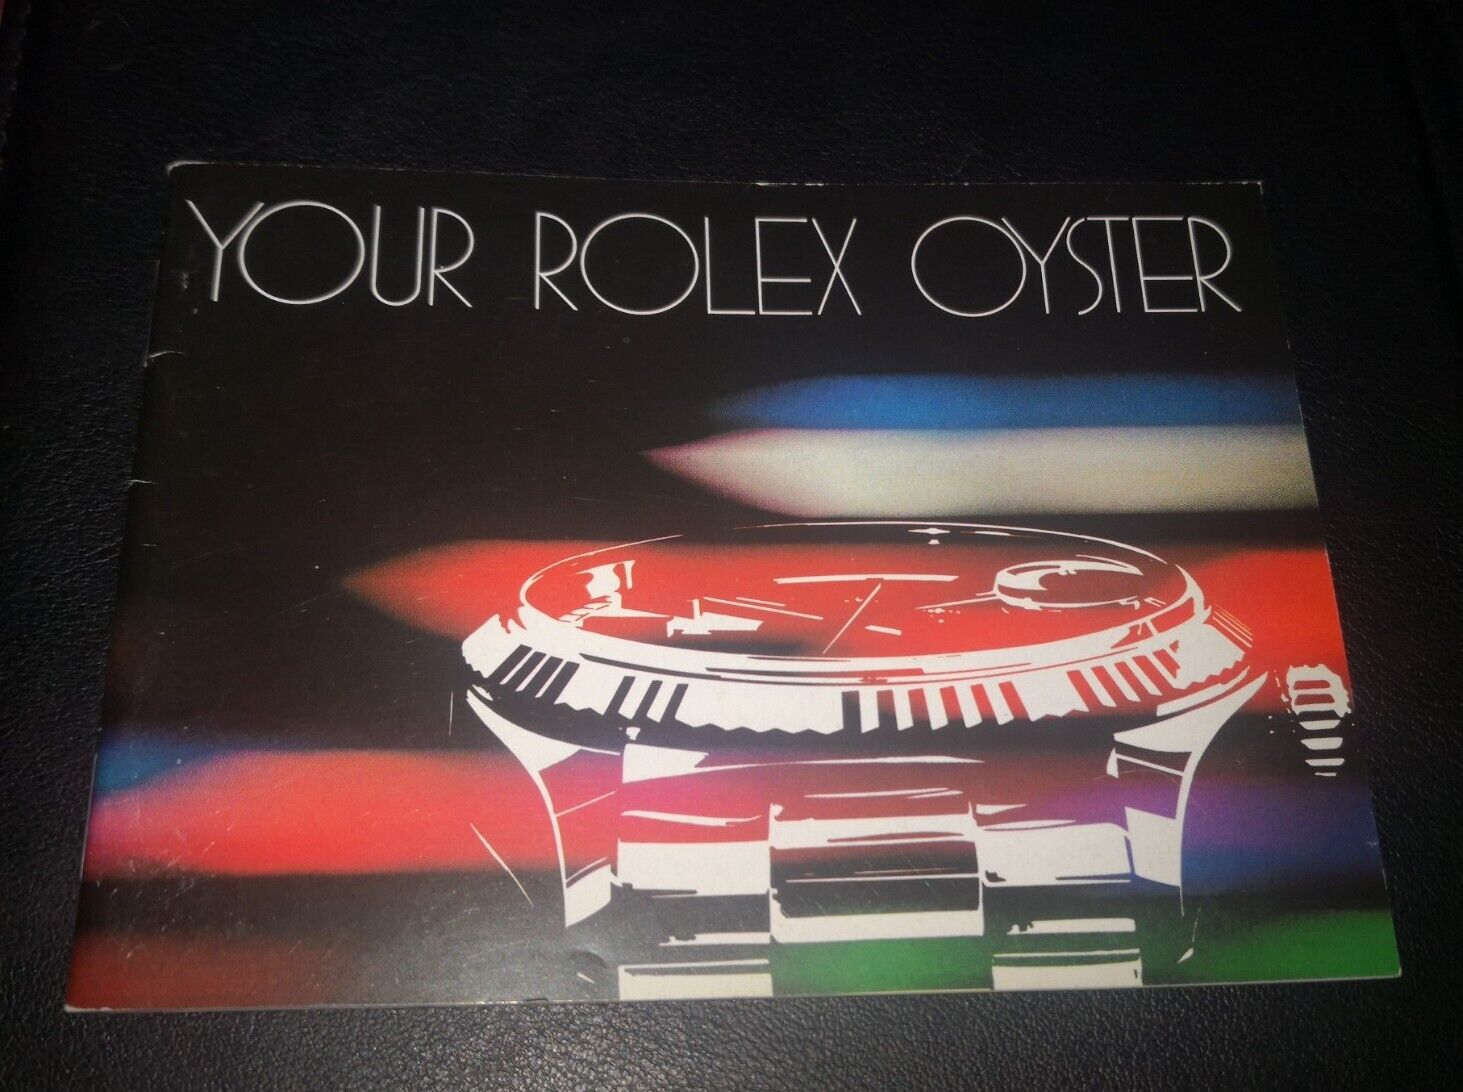 Vintage ROLEX Collectible 1981 'Your Rolex Oyster' Booklet 579.26 Owners Manual